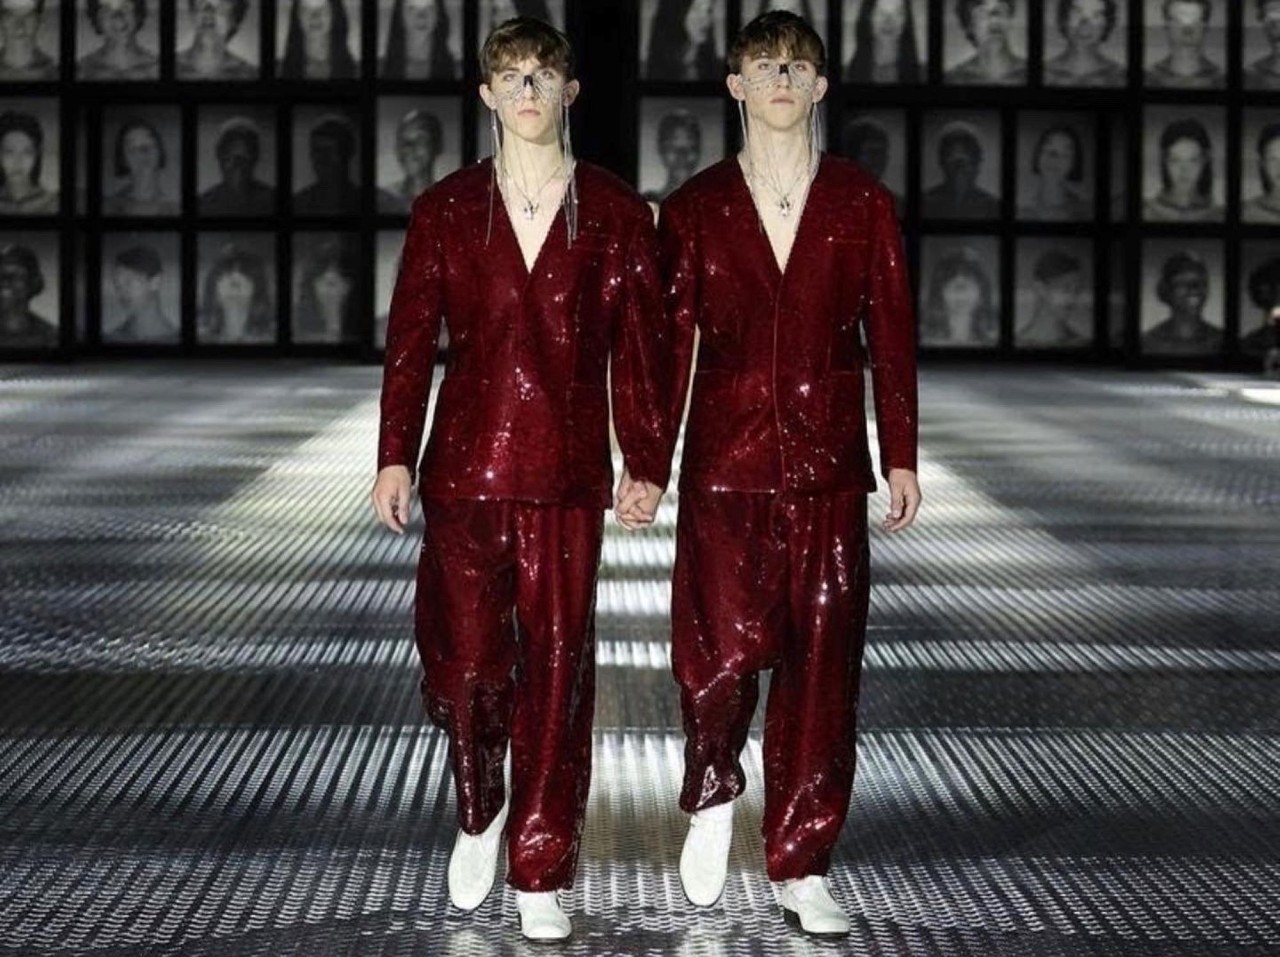 Identical twins Jake and Nate Bartel walk the runway in red sequin suits at the Gucci 2022 runway show in Milan, Italy. 